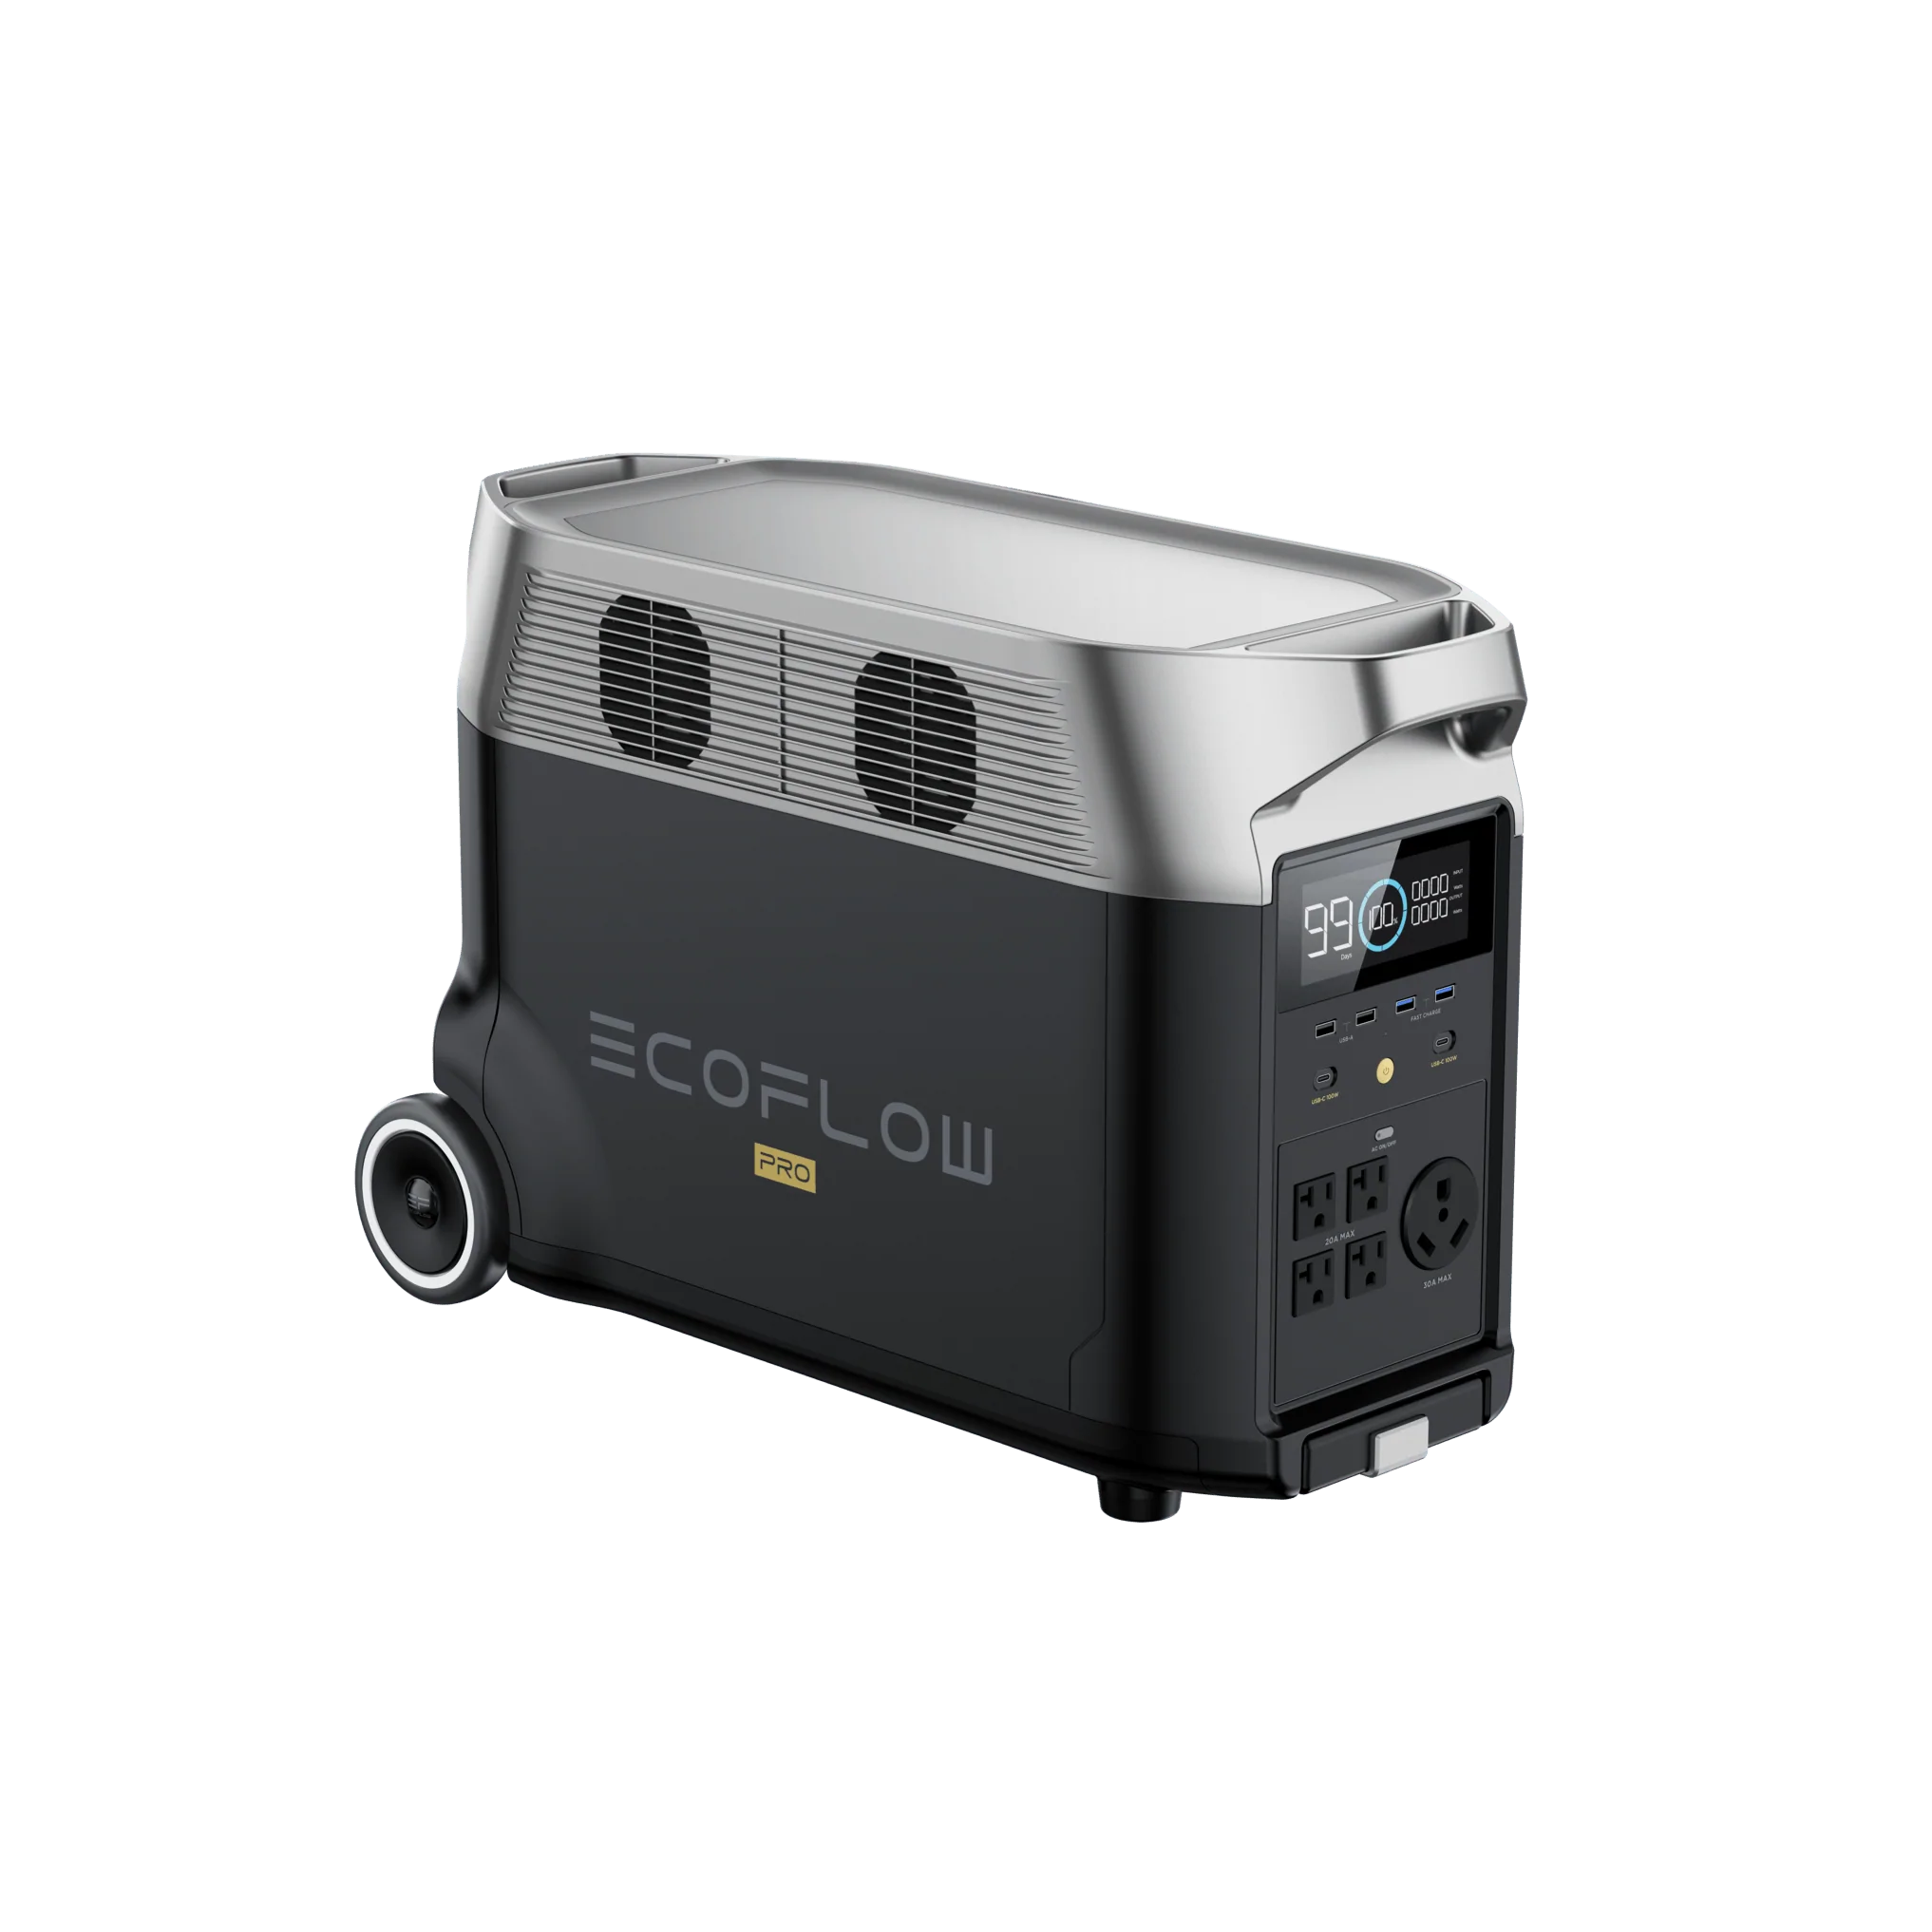 The EcoFlow DELTA Pro portable generator is displayed on a plain white background.